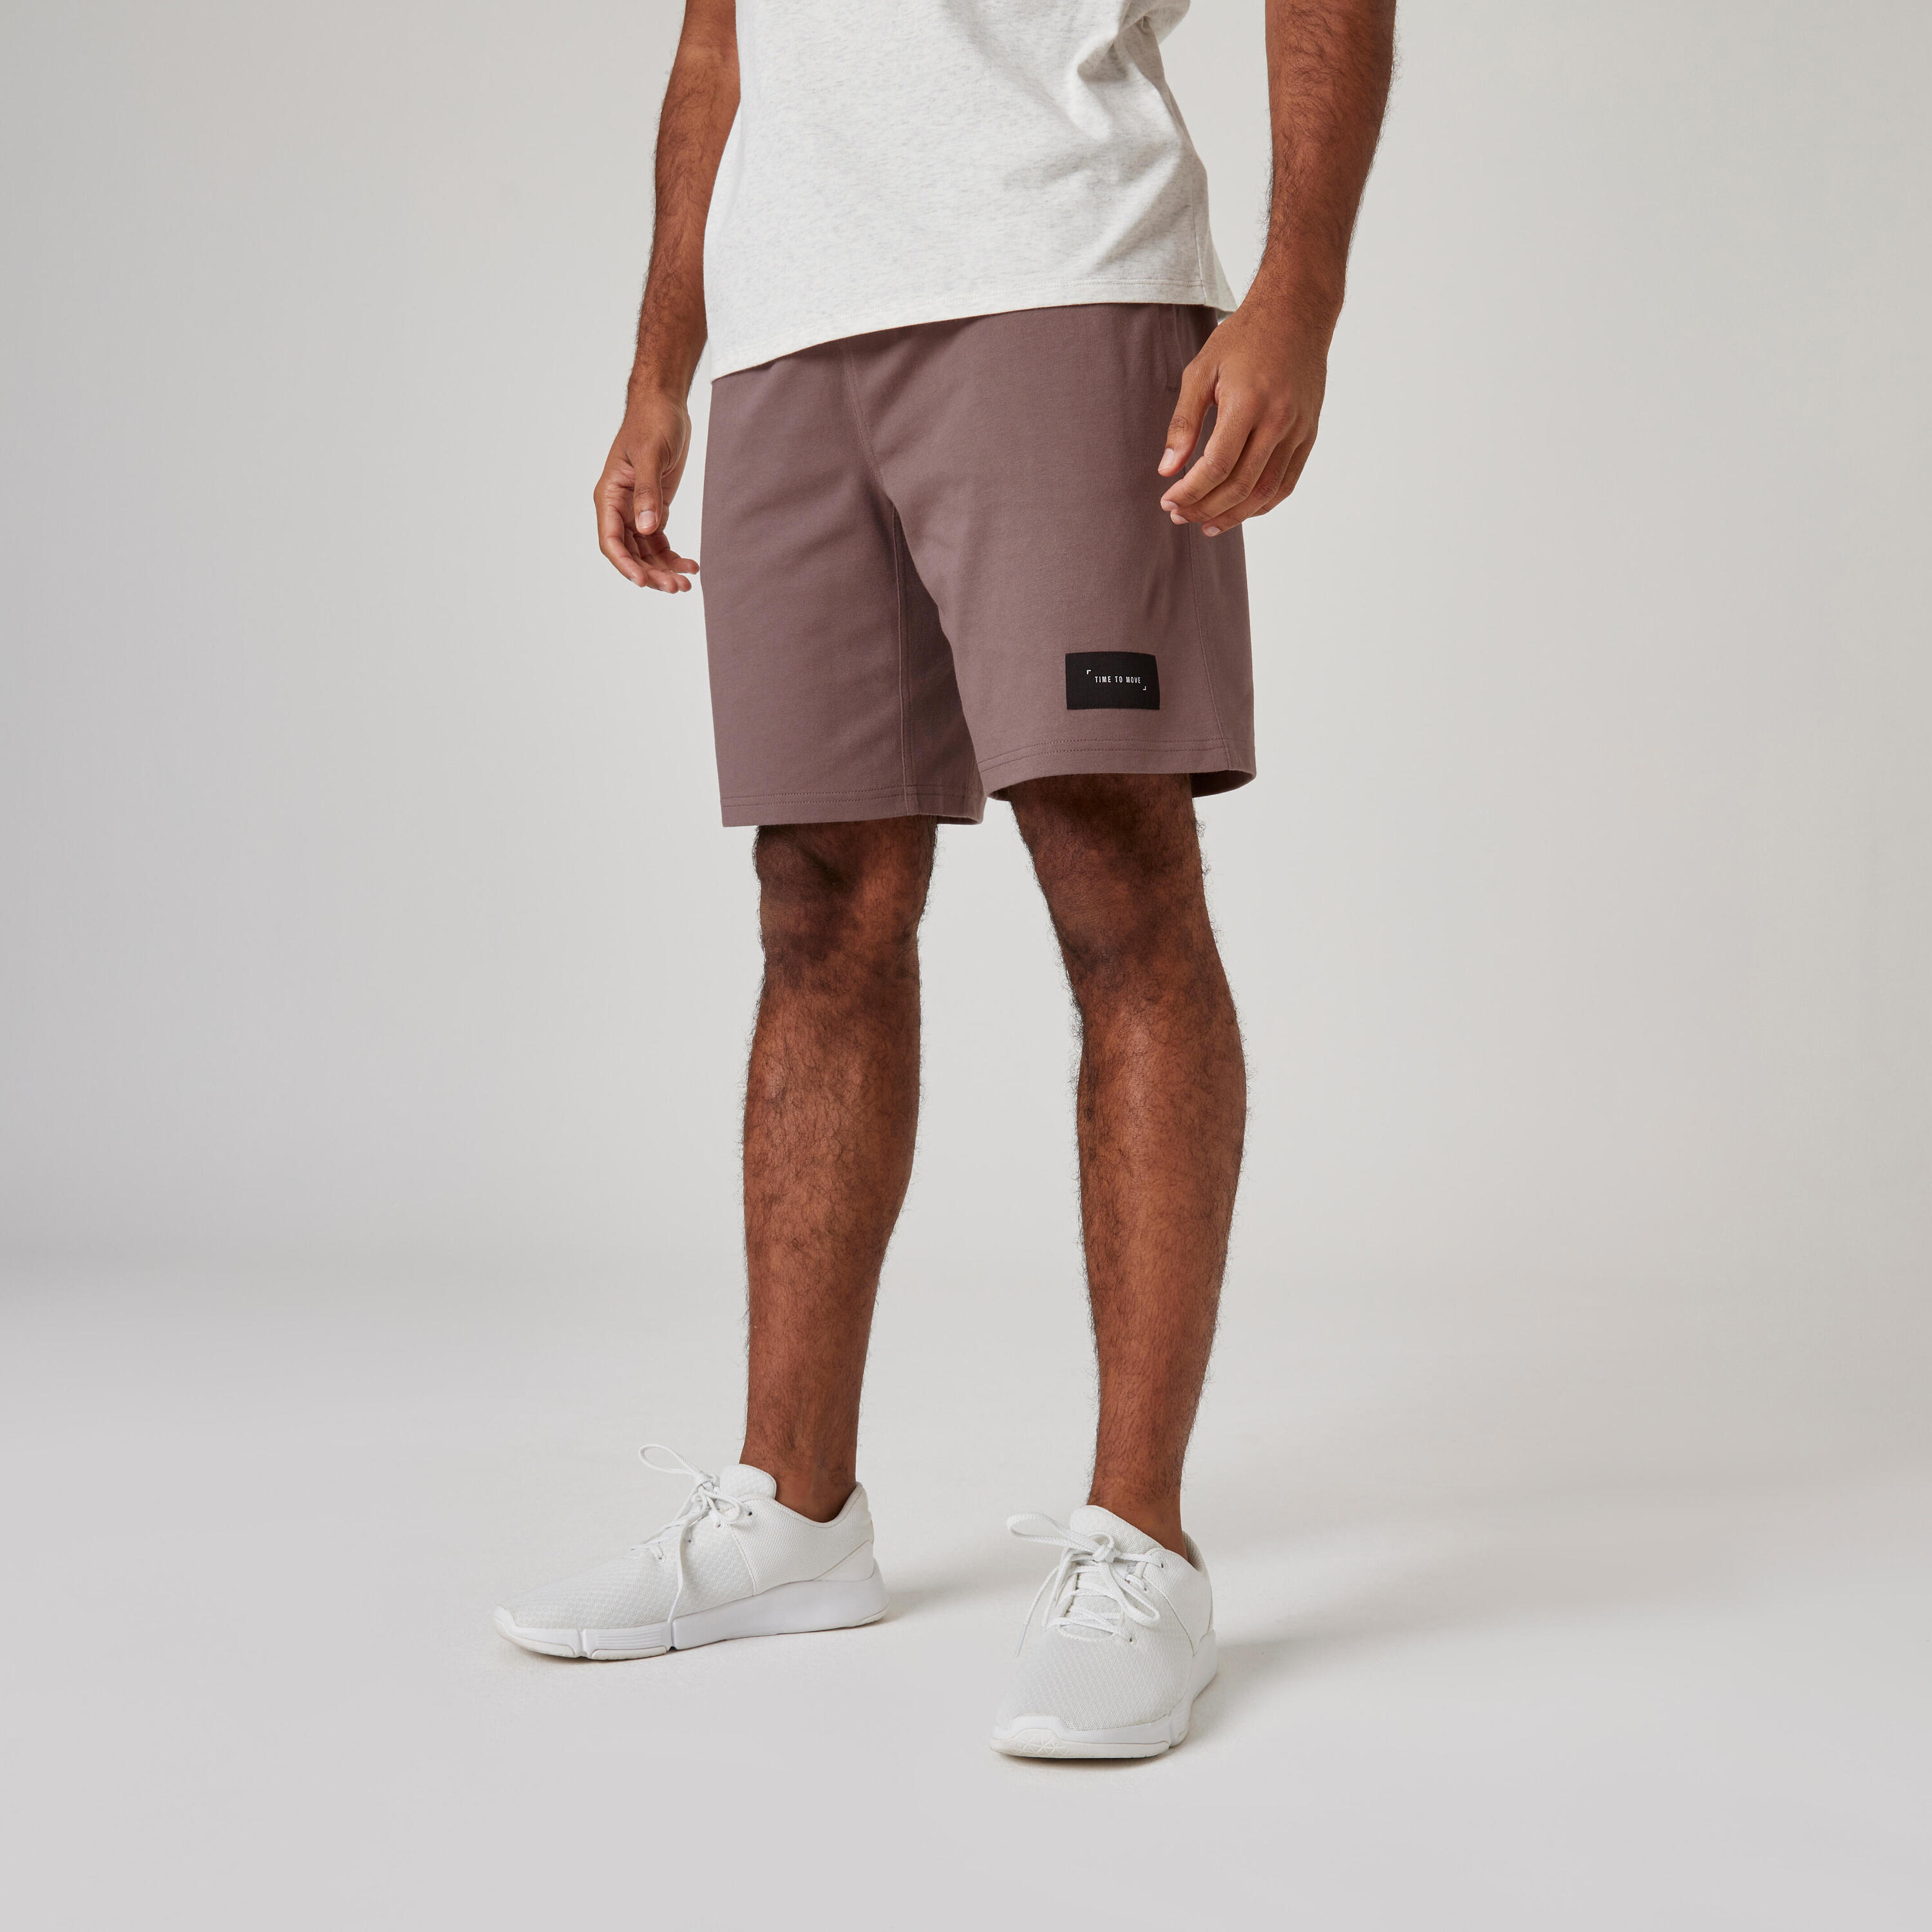 Men's Straight-Cut Cotton Fitness Shorts with Pocket - Grey 1/7